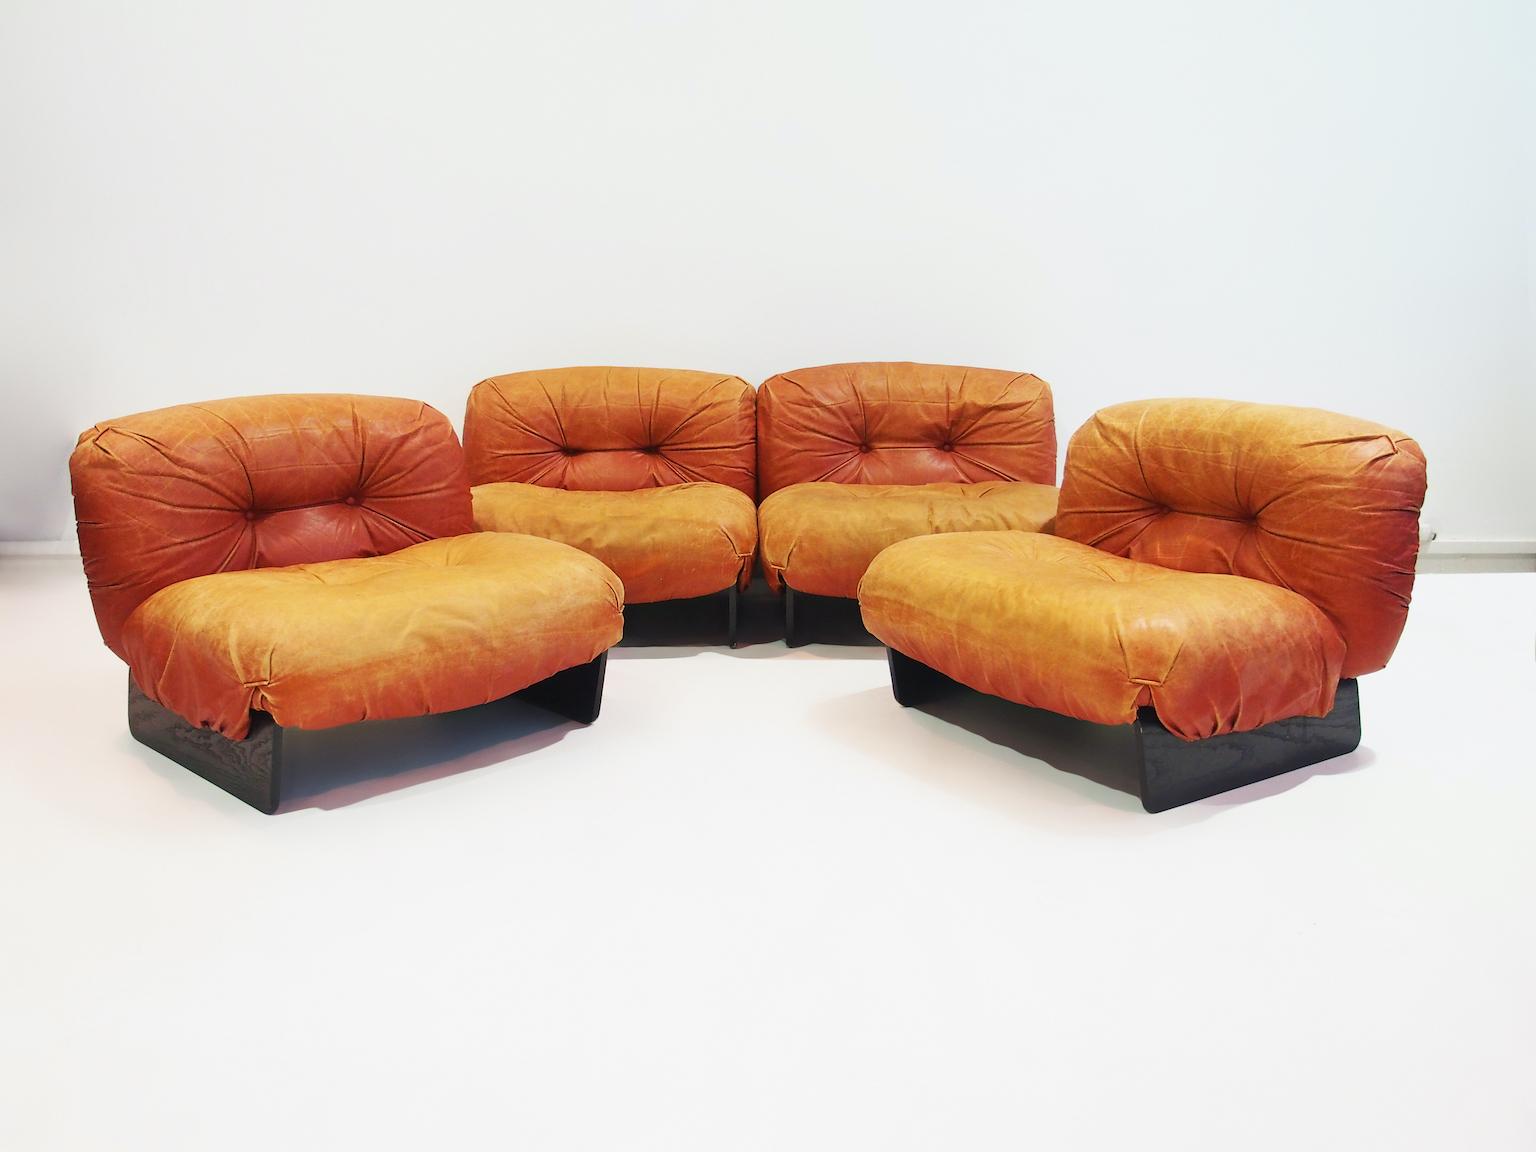 Italian Set of Four Giuseppe Munari Modular Lounge Chairs Upholstered in Cognac Leather For Sale